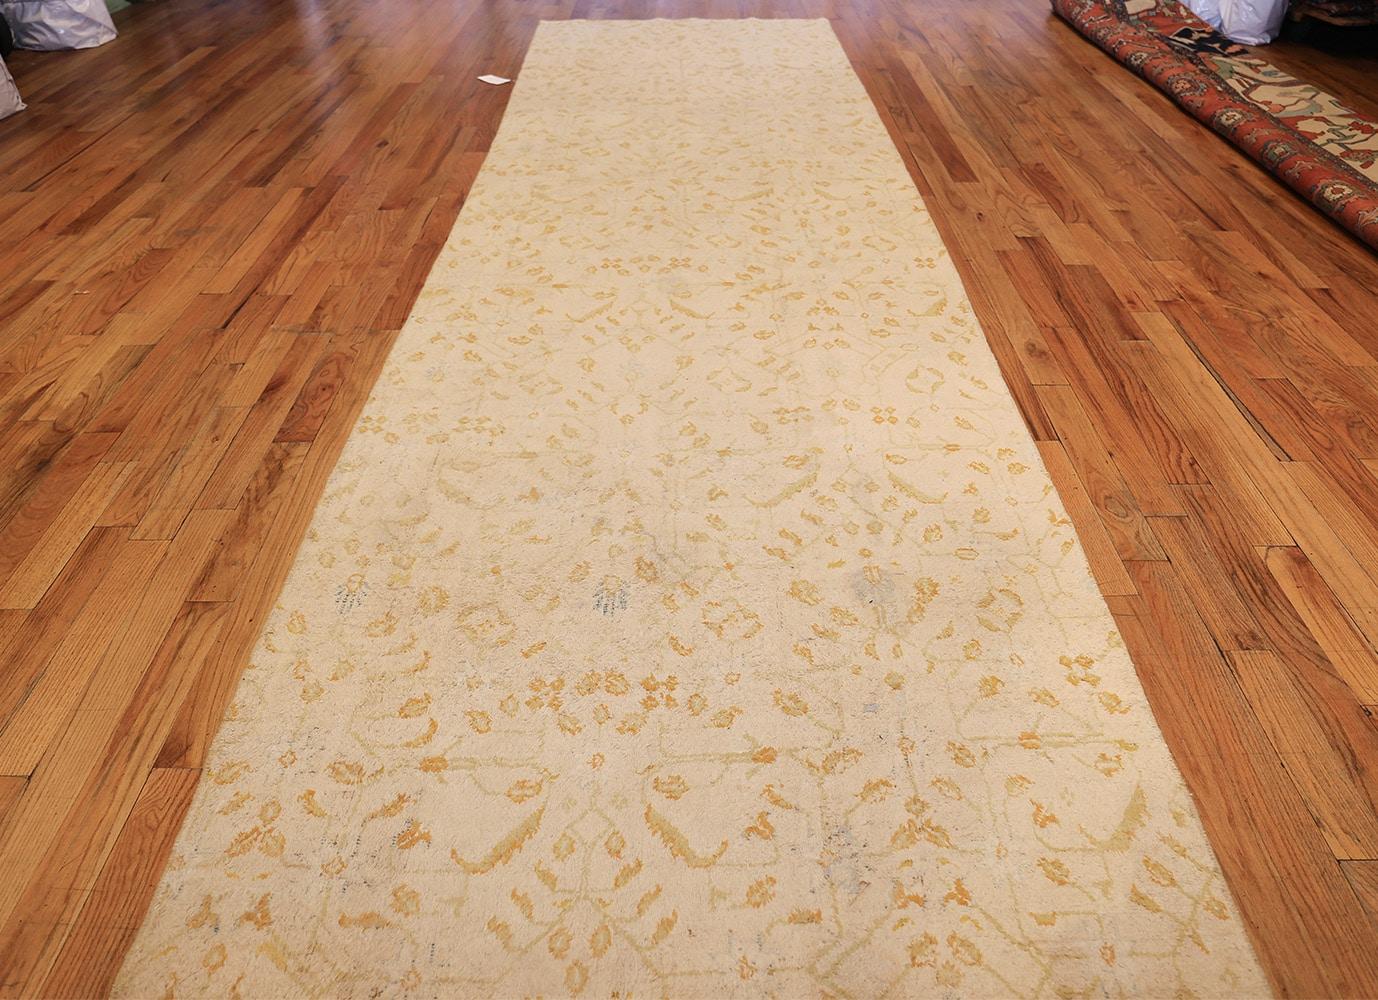 Beautiful Long and Narrow Size and Extremely Luxurious Ivory Cotton Pile Indian Agra Antique Runner Rug, Rug Origin and Type: Antique Indian Area Rug, Circa / Approximate Weaving Date: 1900